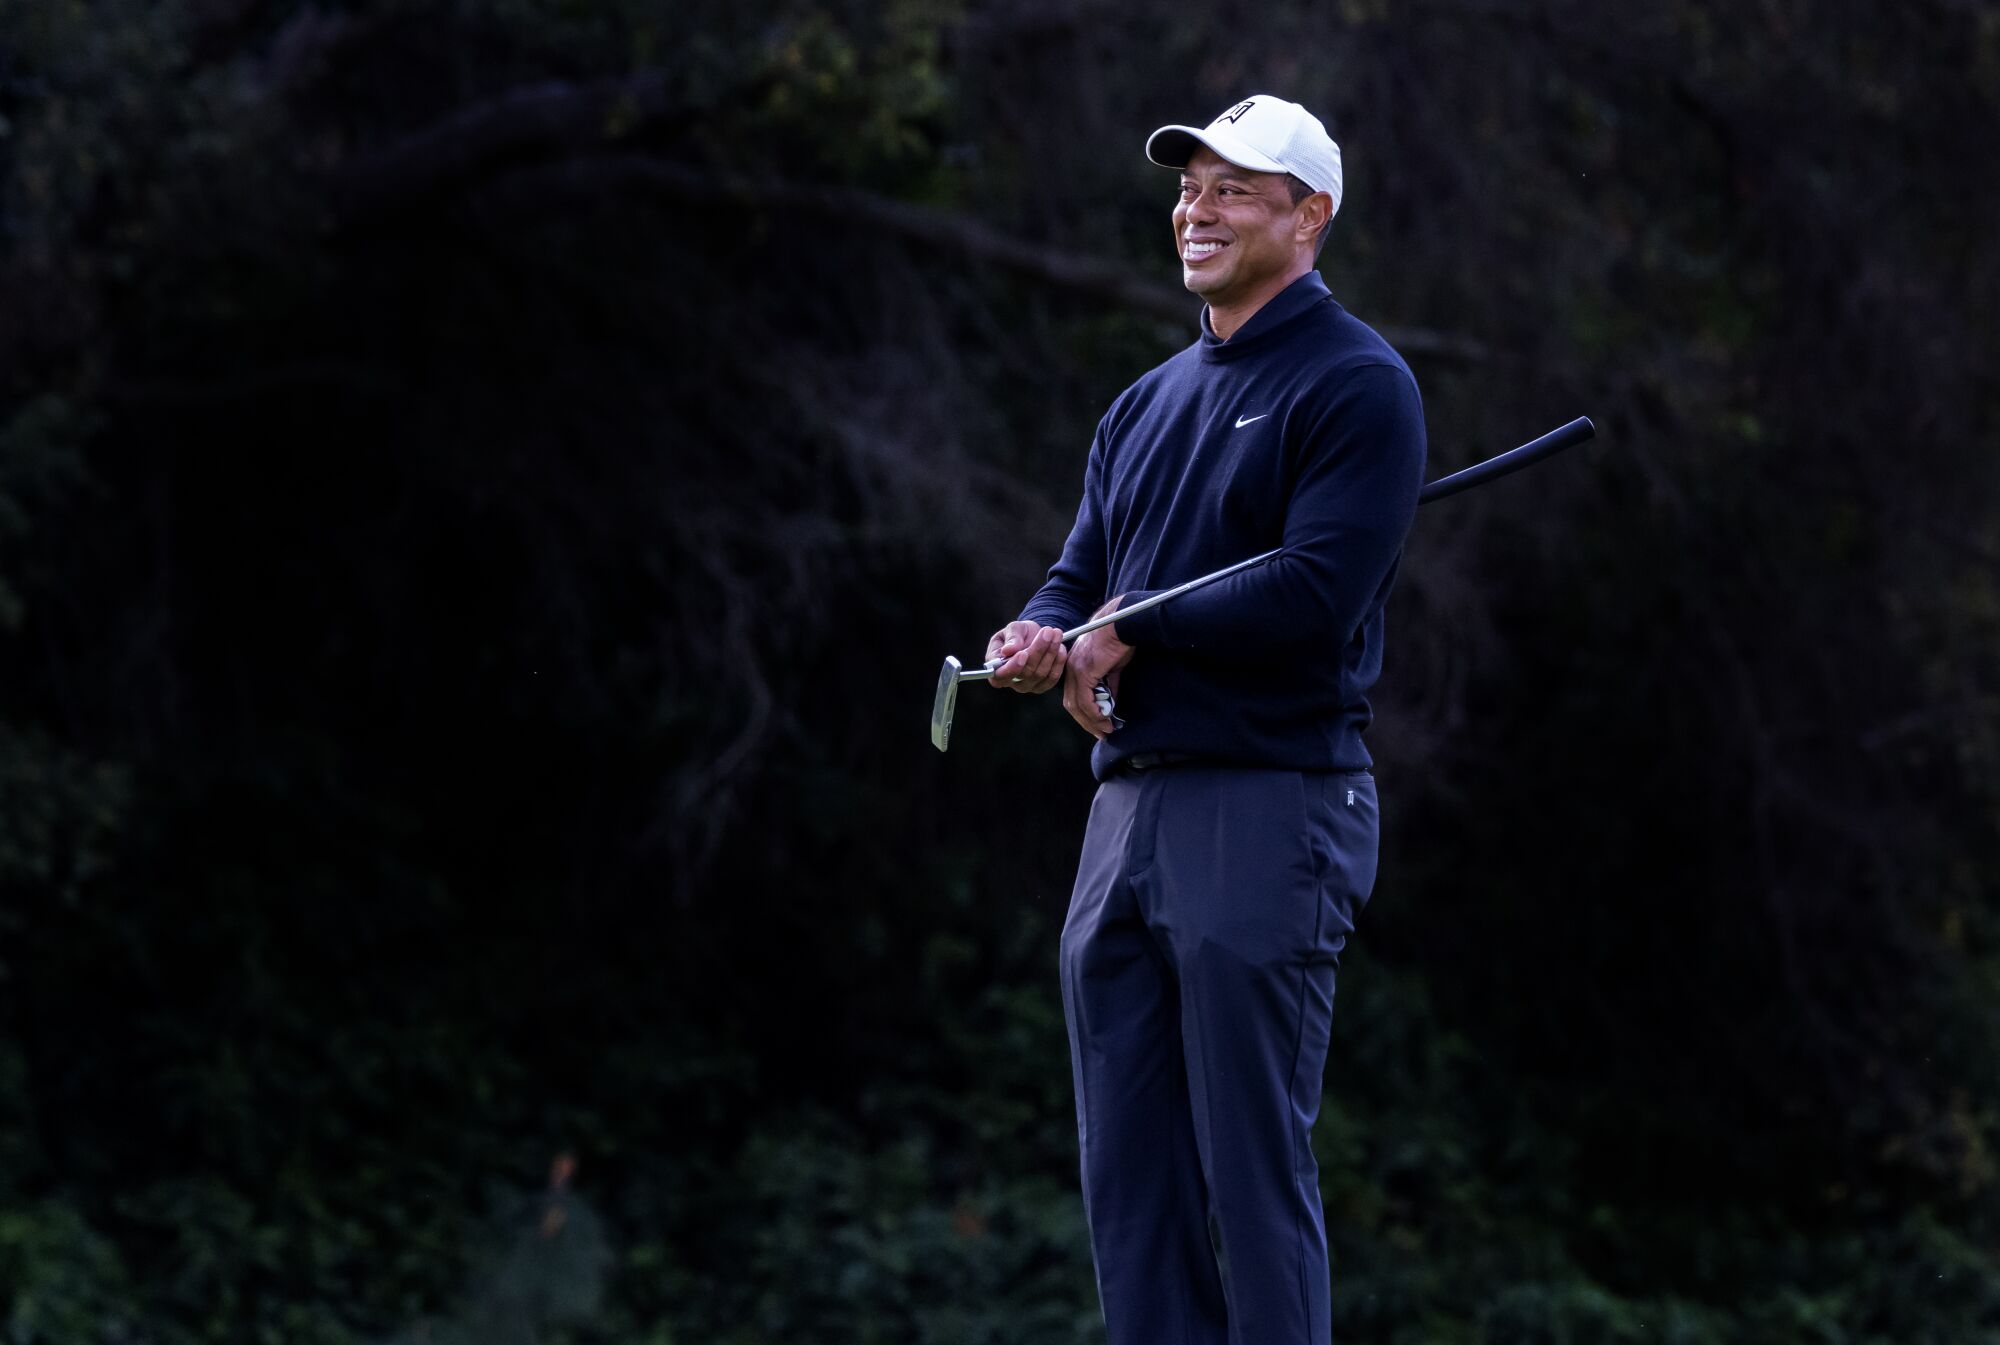 Tiger Woods smiles at Rory McIlroy after McIlroy made a 65 foot chip-in for birdie 